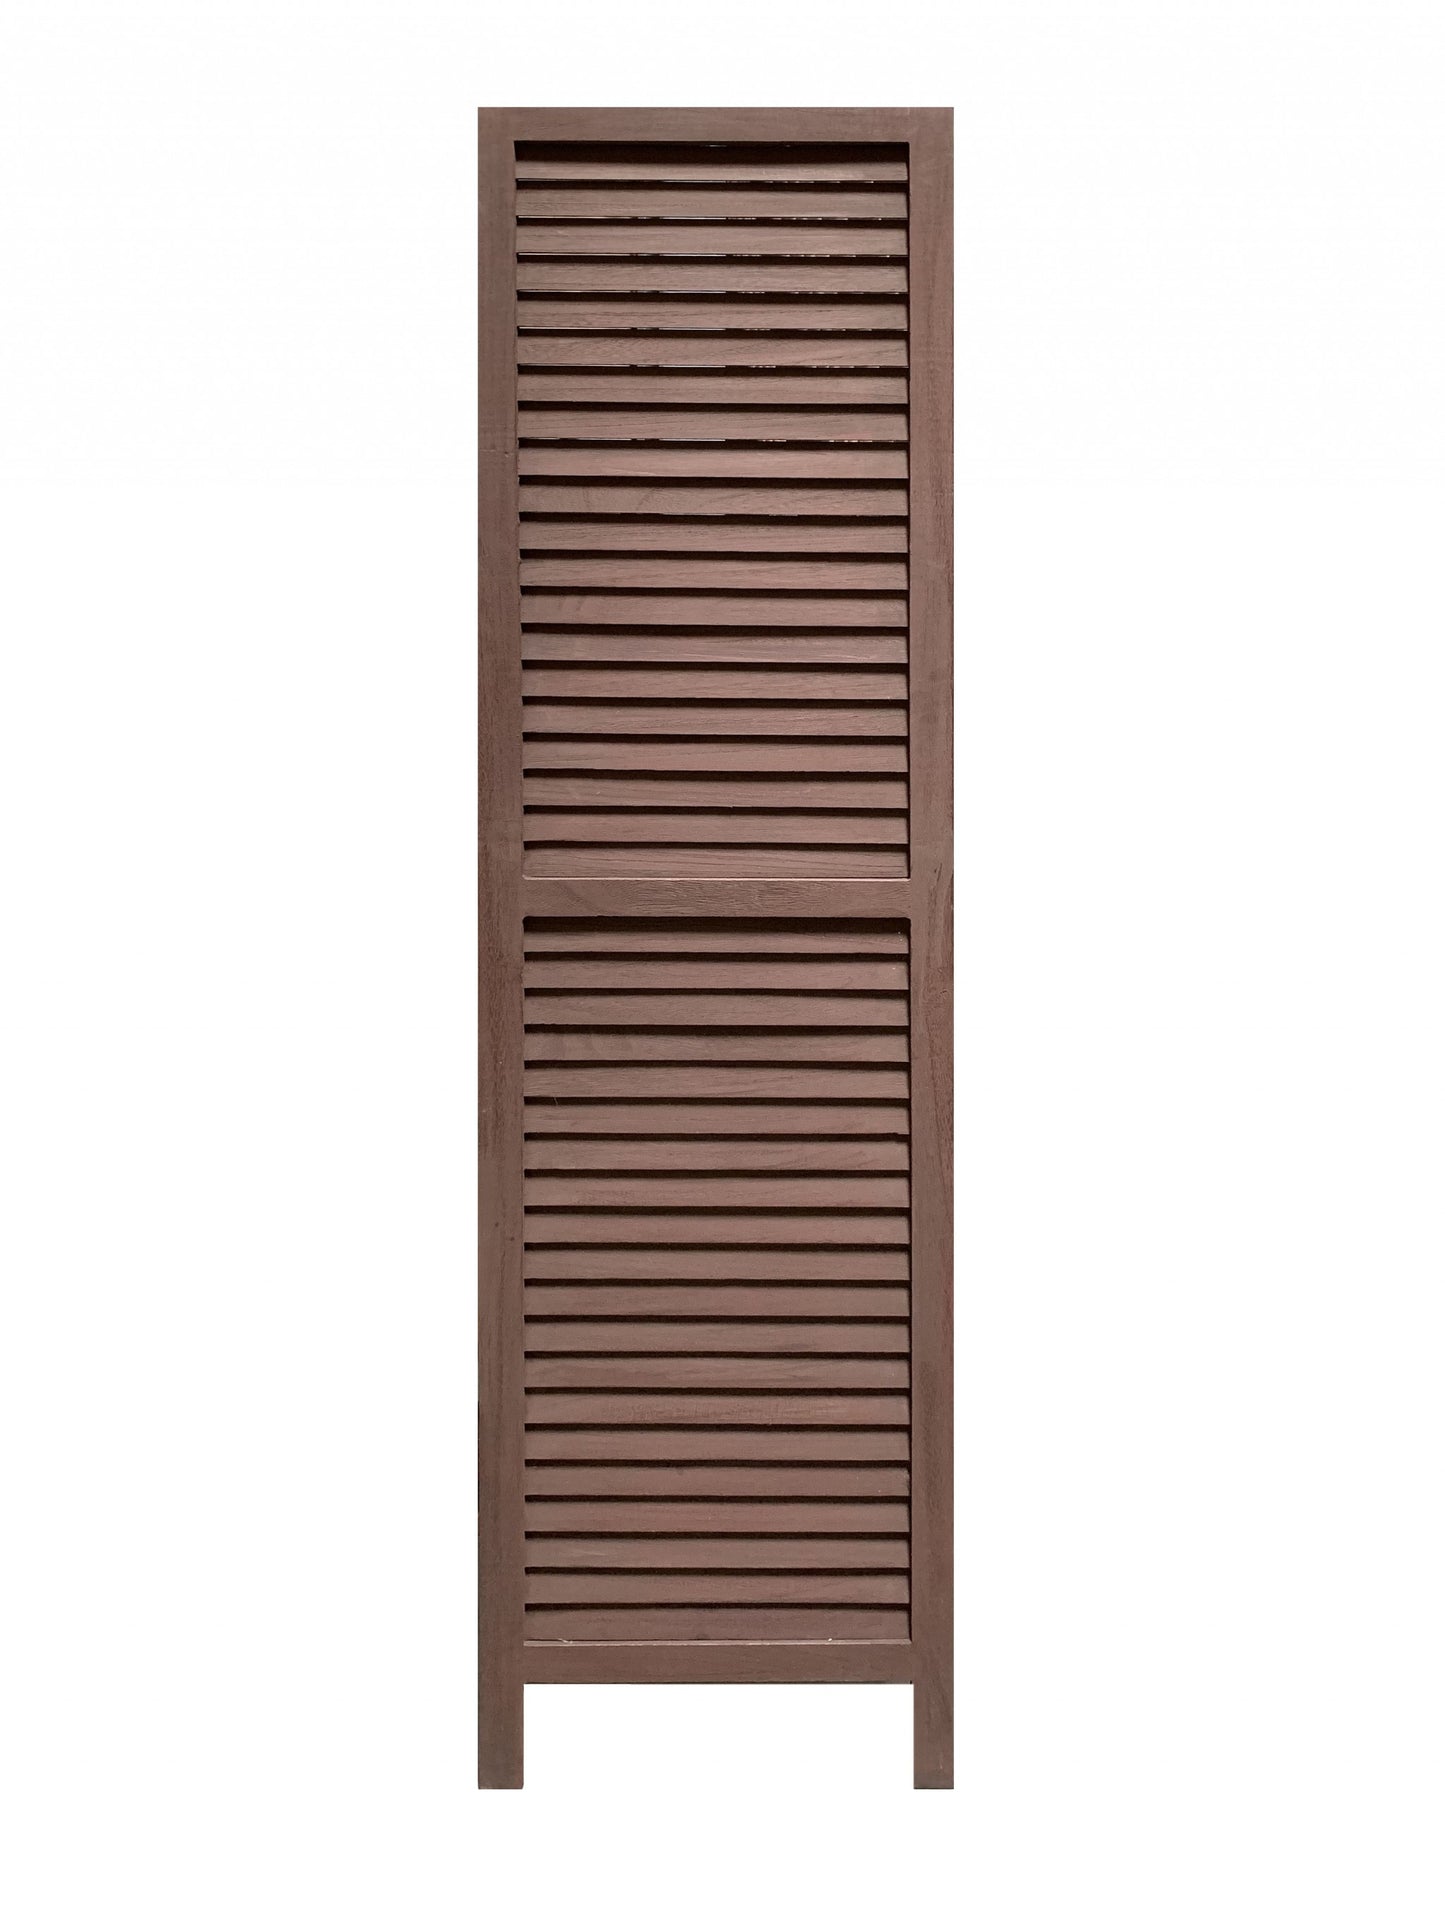 Stylish Three Panel Washed Brown Shutter Divider Screen